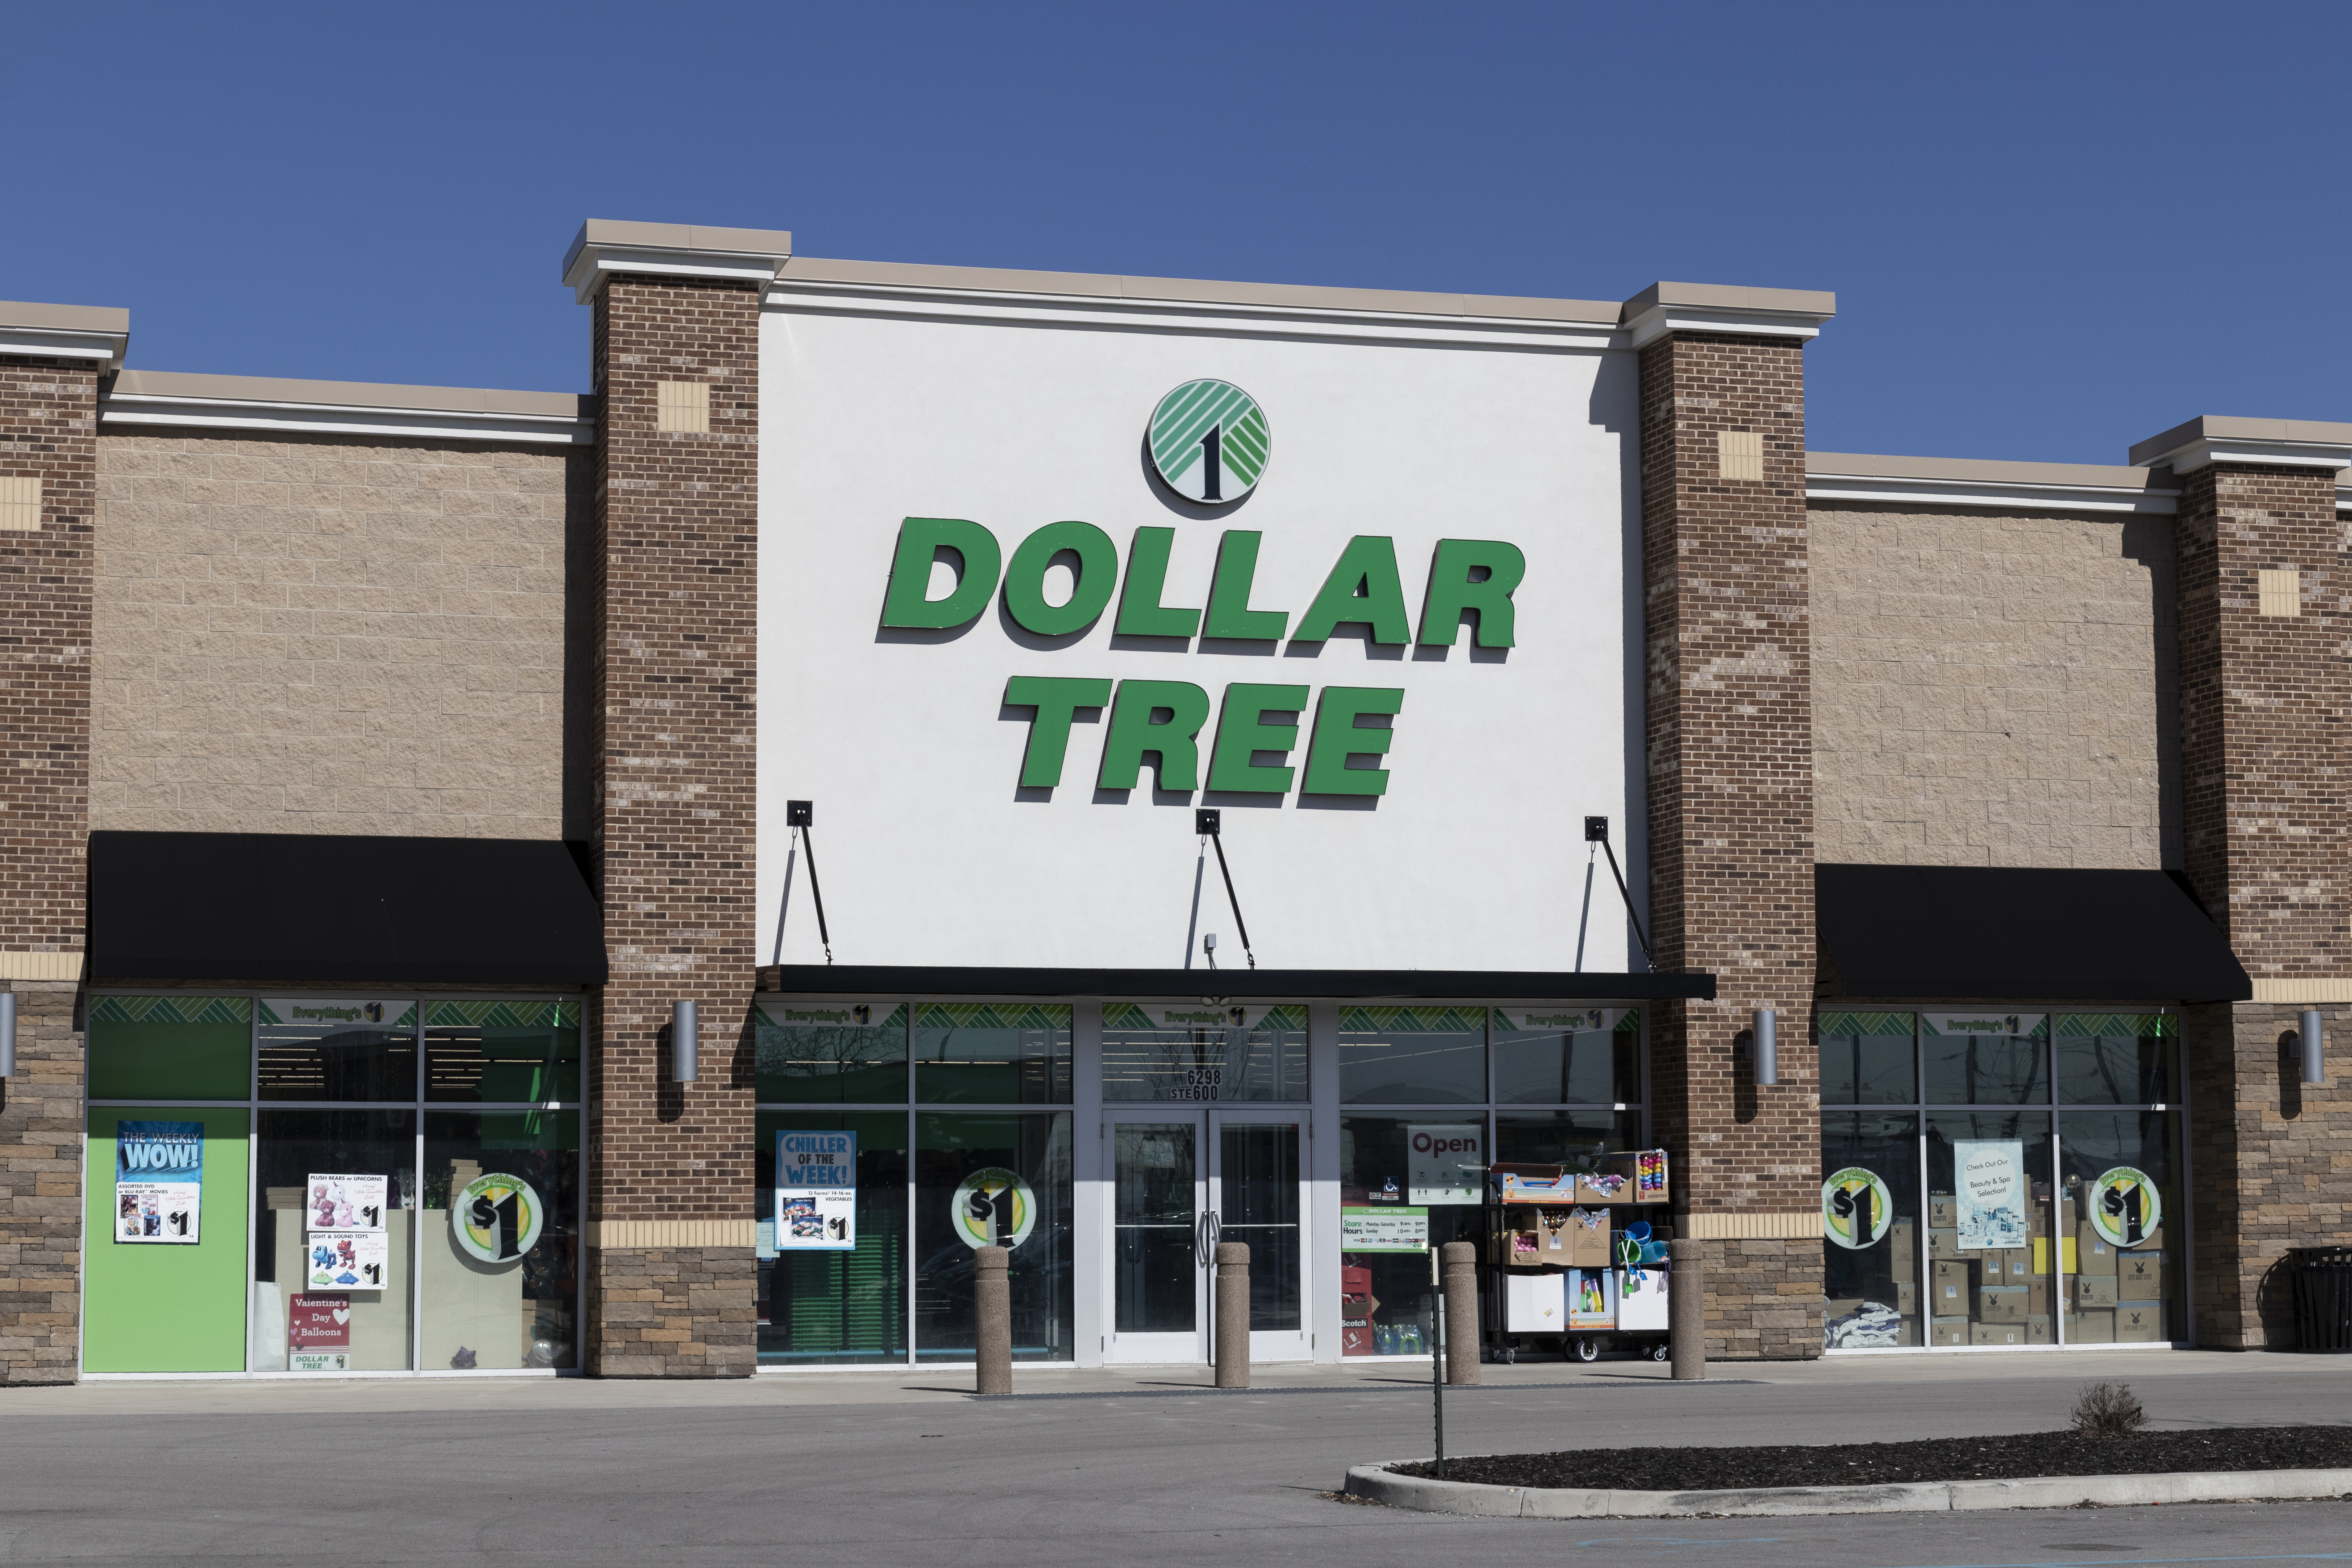 A savings expert has revealed the best way to spend $20 at a dollar store